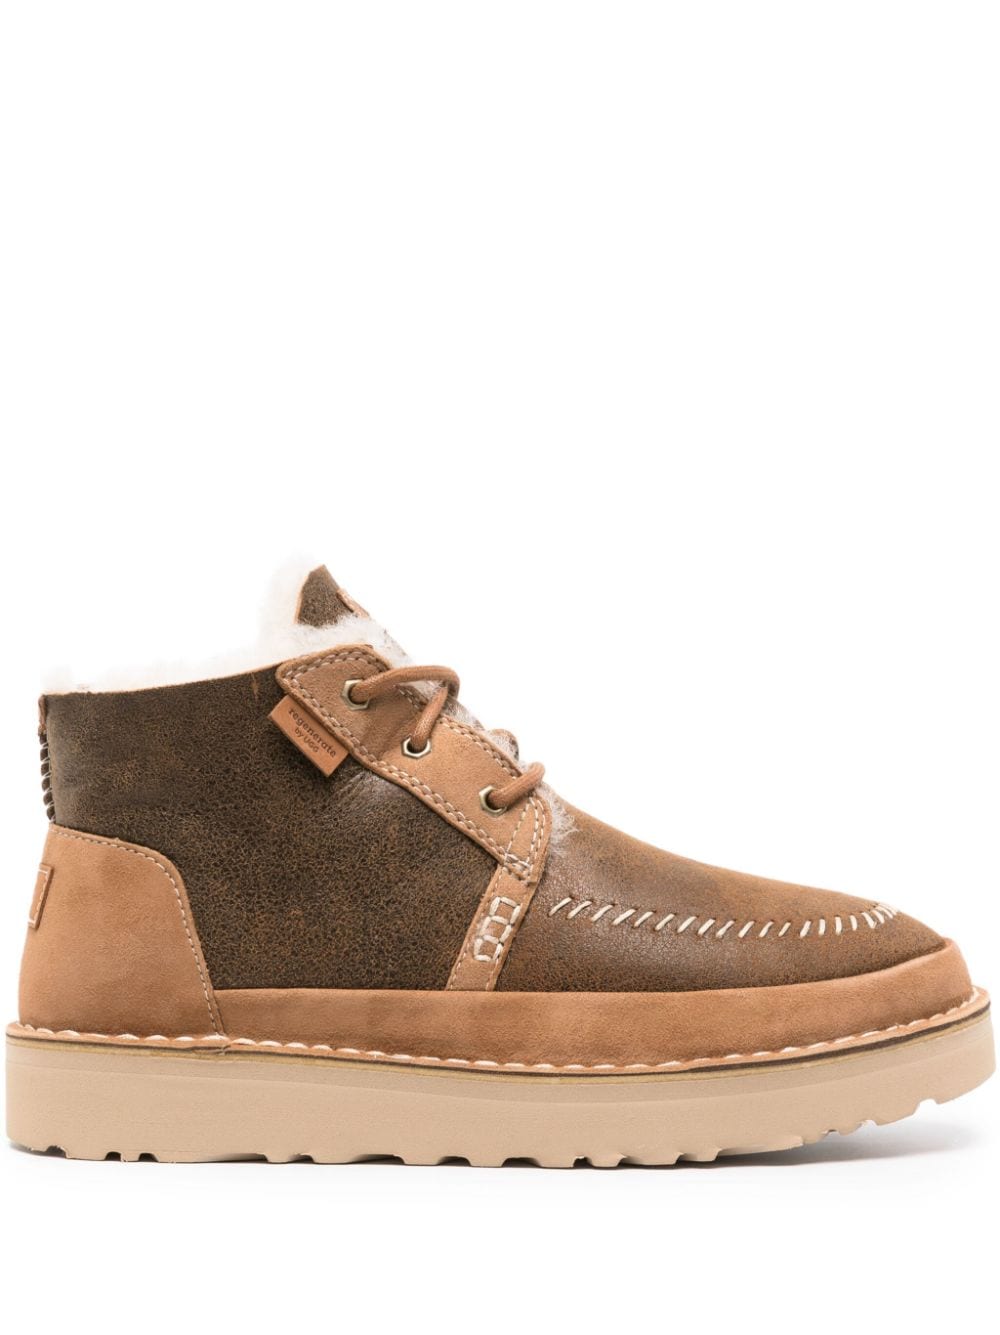 Ugg Neumel Lace-up Boots In Brown